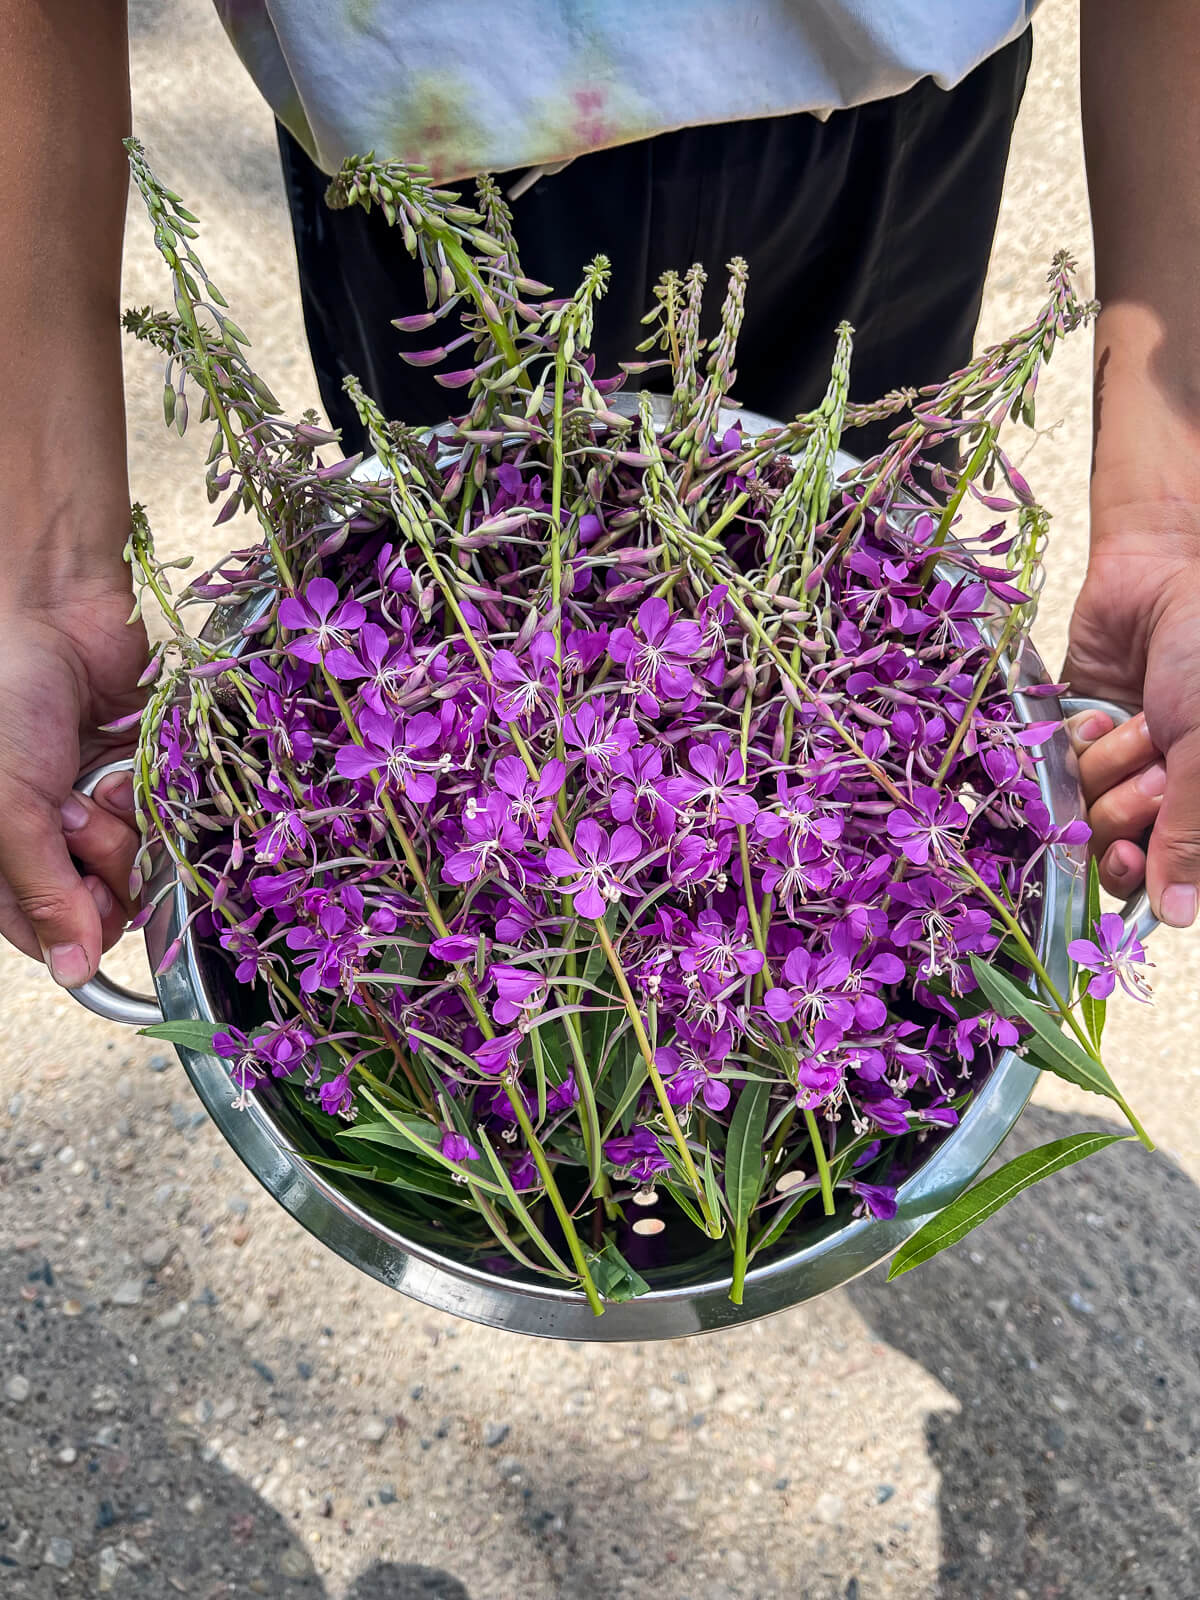 Harvested fireweed in silver bowl. 